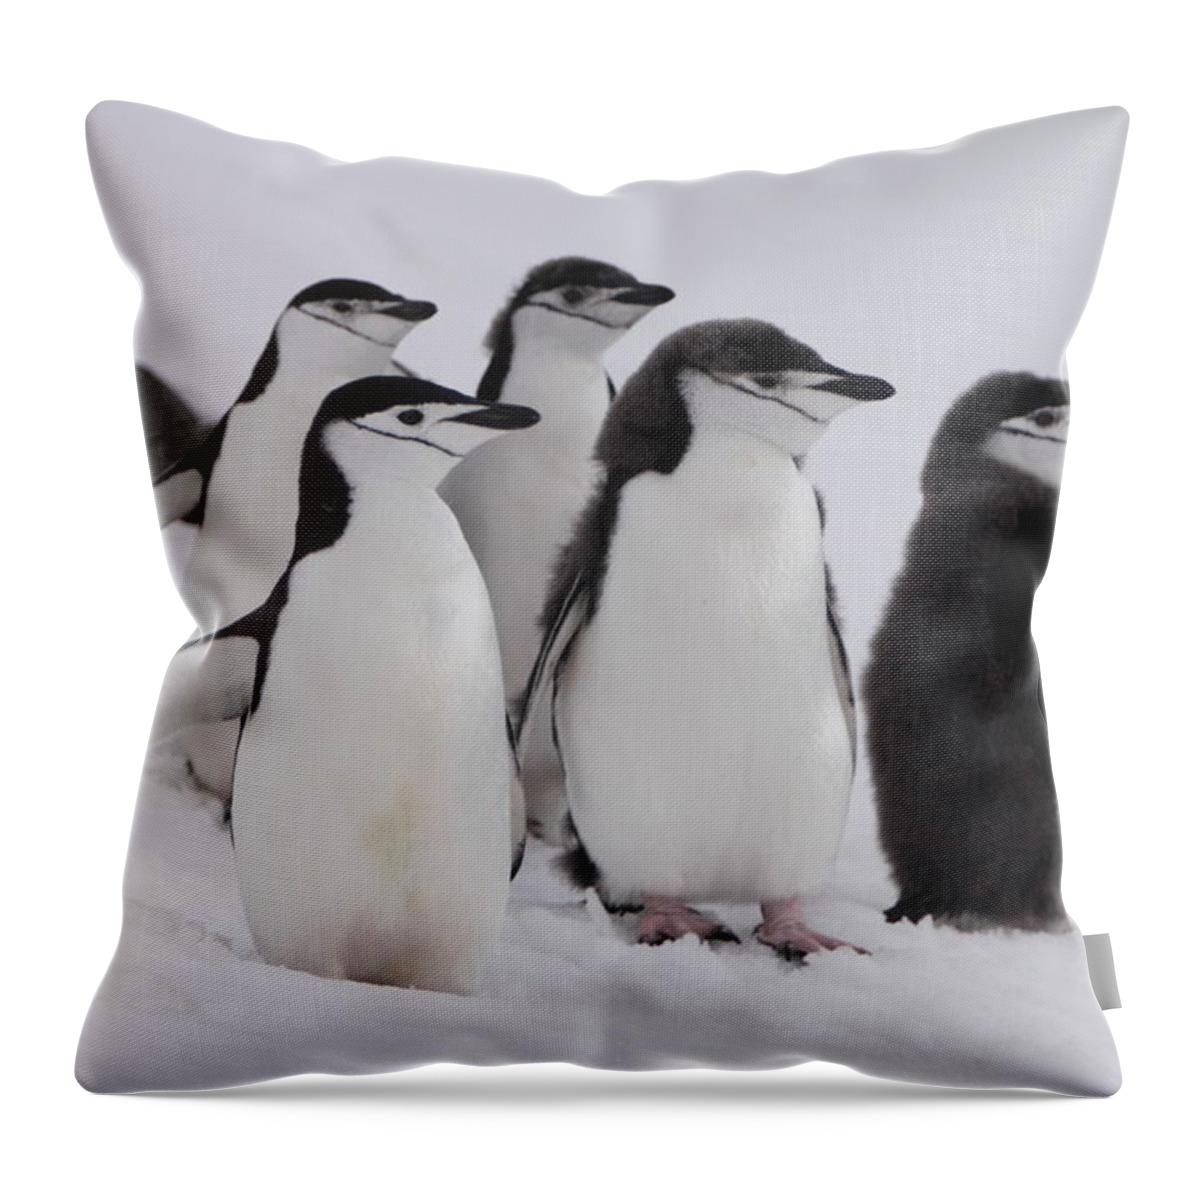 Penguin Throw Pillow featuring the photograph Chinstrap Penguins by Bruce J Robinson